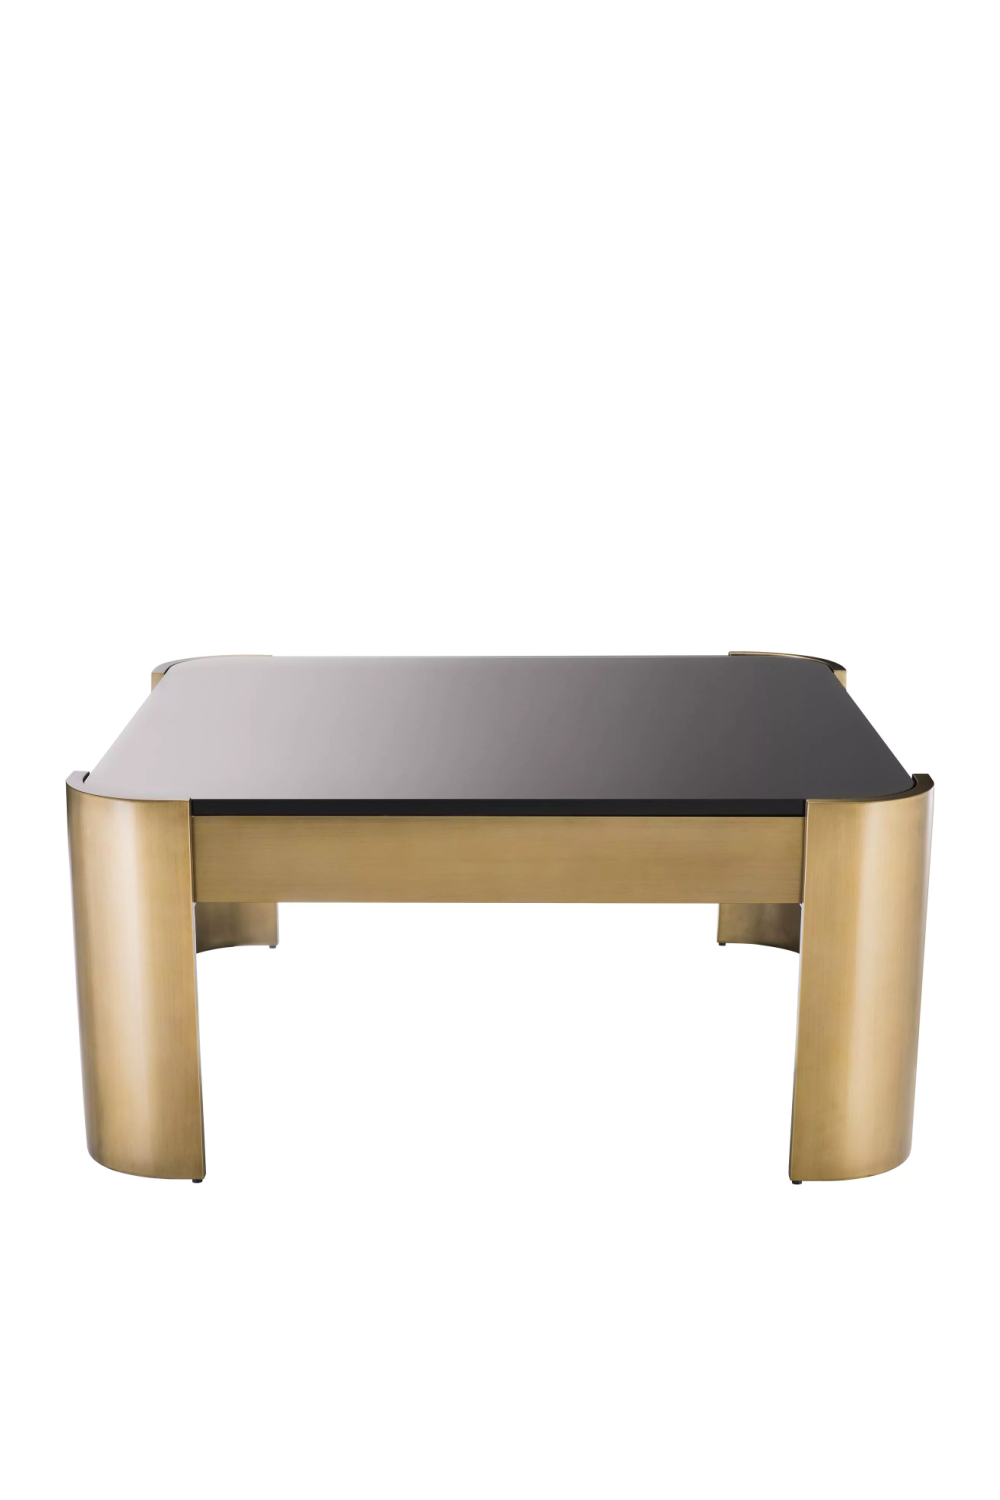 Cleo Side Table - Tall - Antique Brass